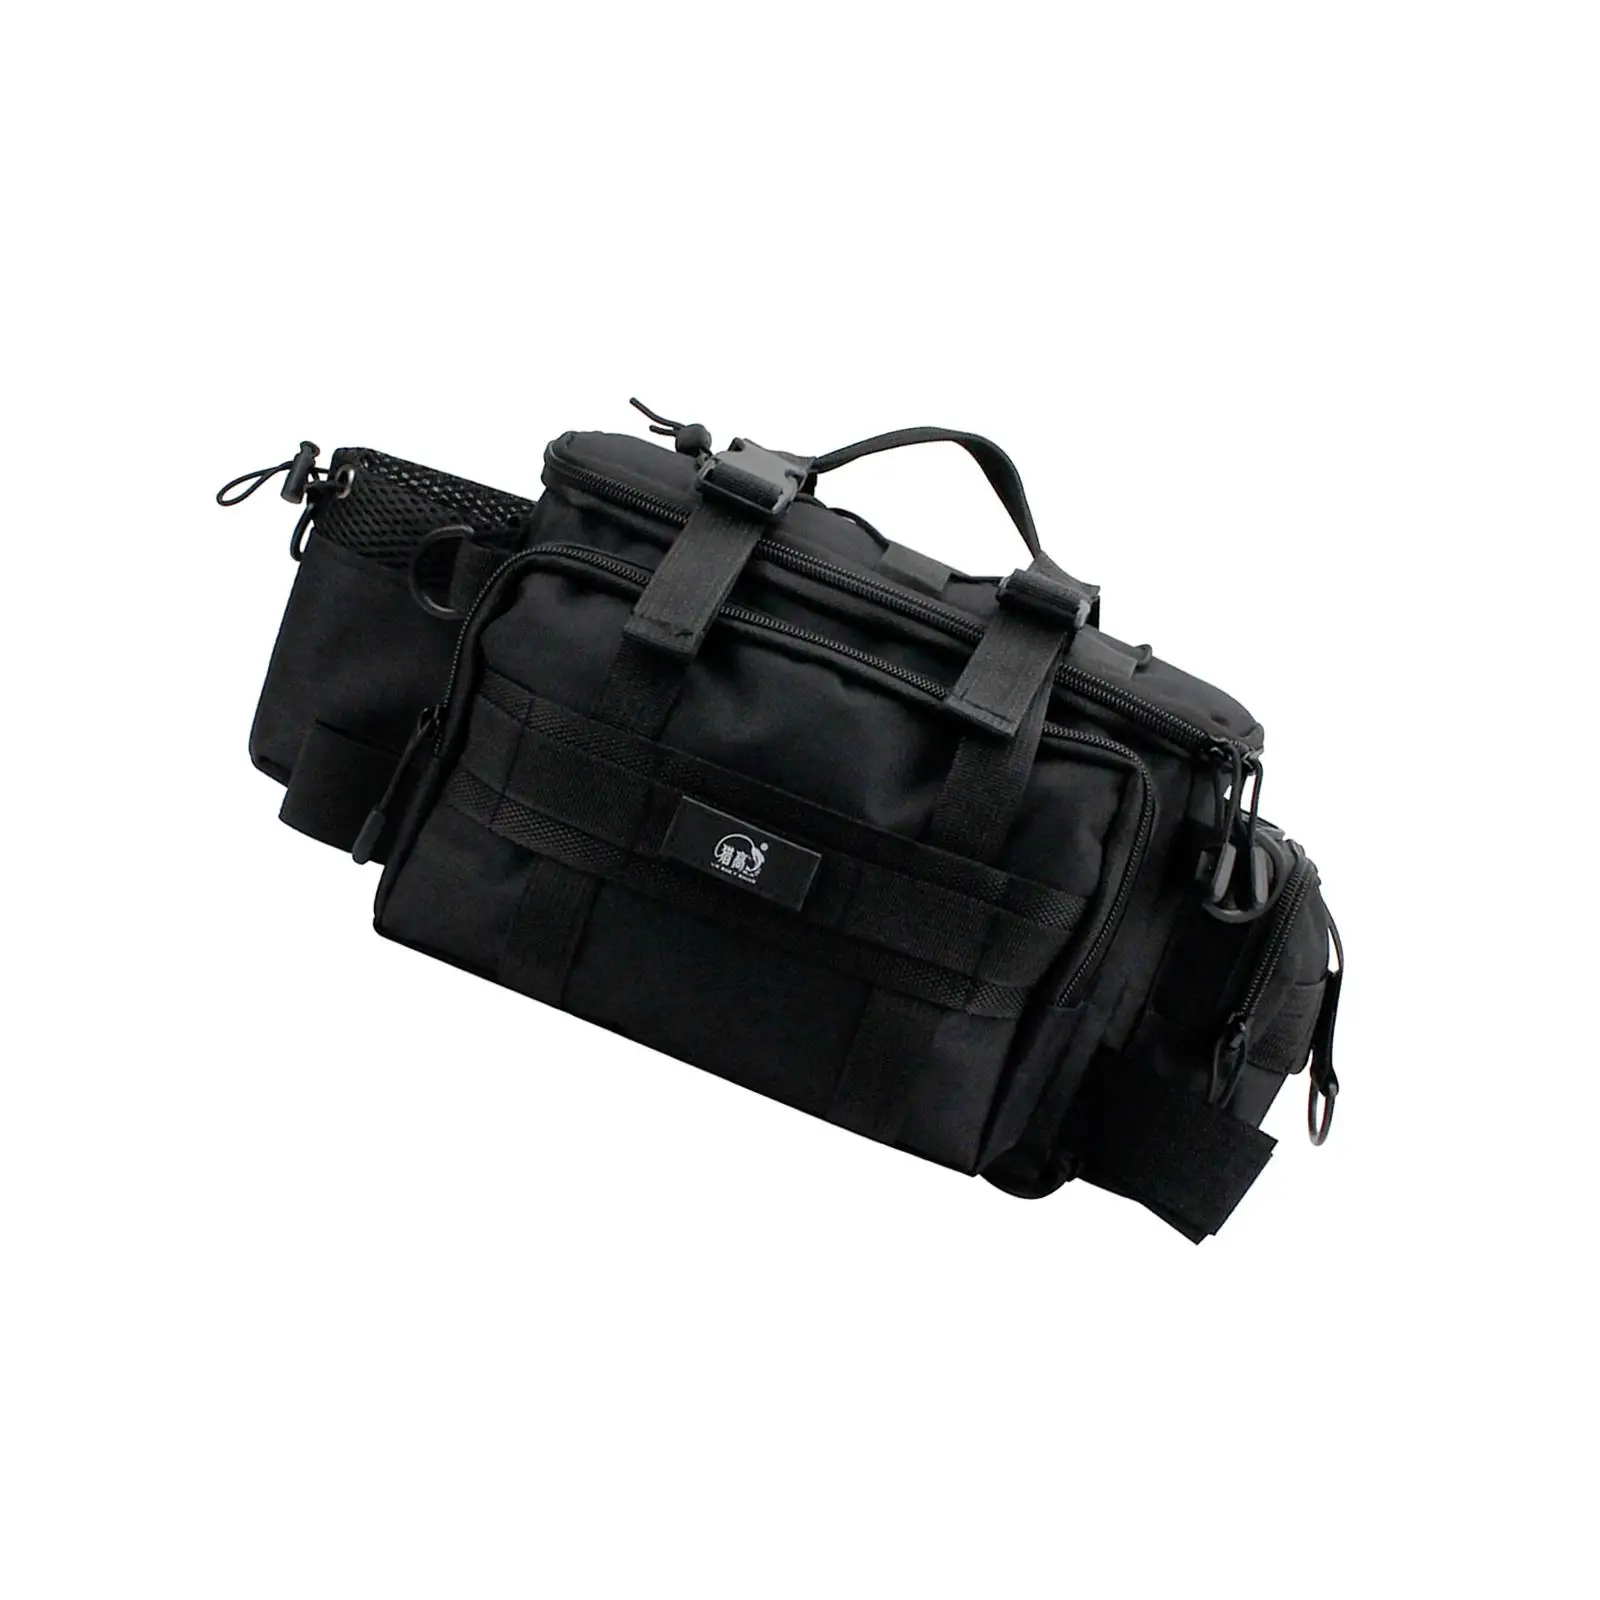 Large Capacity Fishing Tackle Bag Handbag Container Case Organization Carrying Storage Box for Fishing Reels Fishing Line Lures